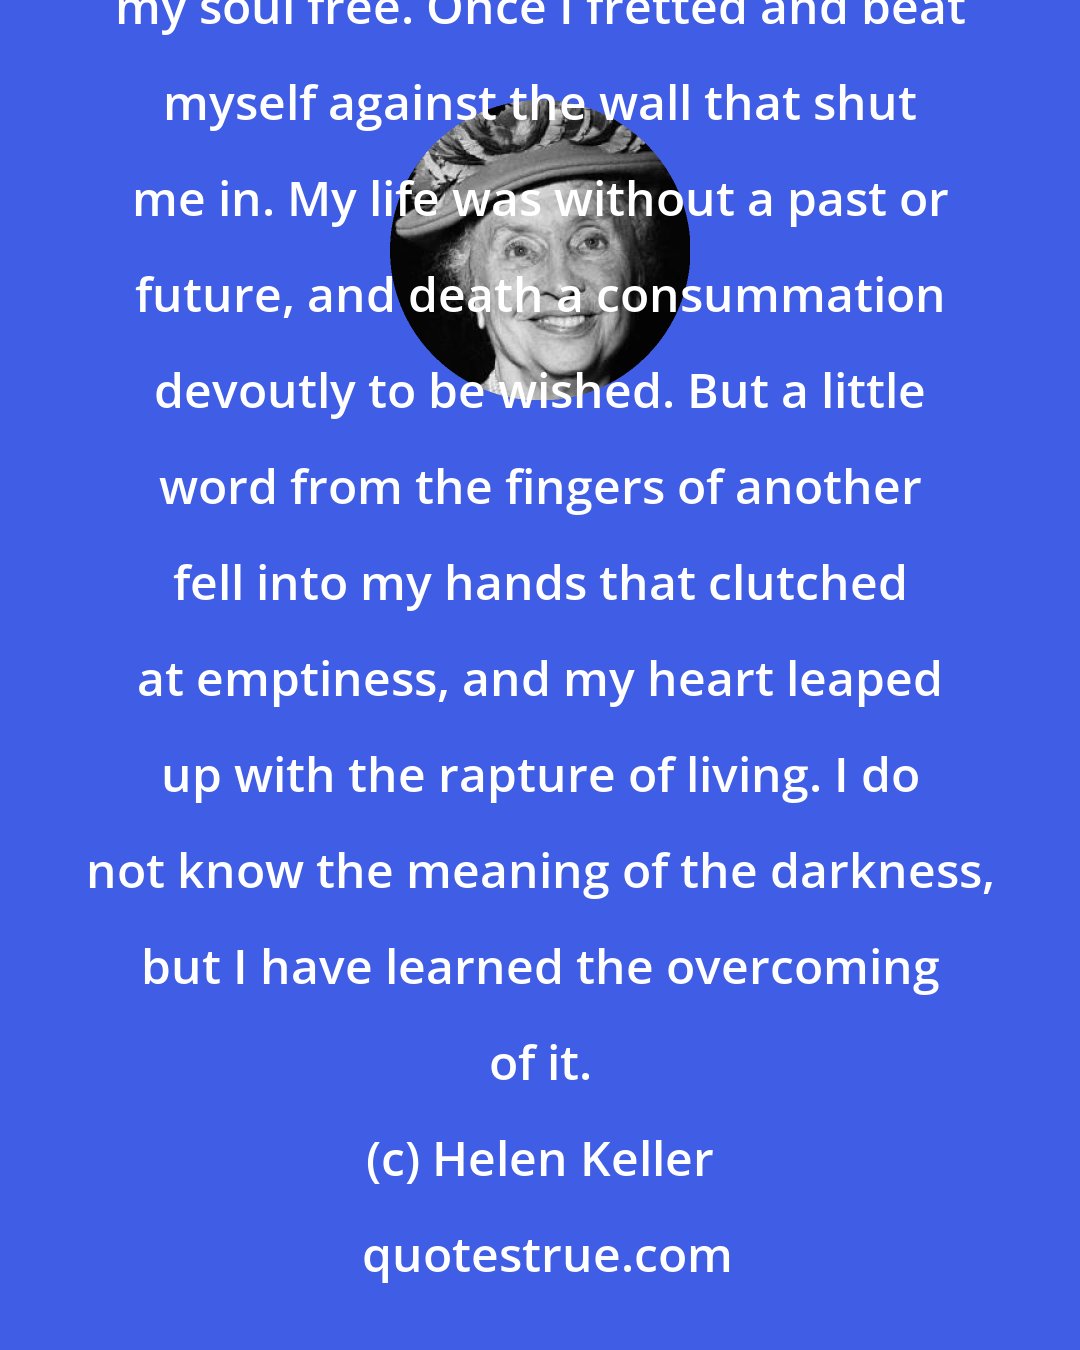 Helen Keller: Once I knew the depth where no hope was and darkness lay on the face of all things. Then love came and set my soul free. Once I fretted and beat myself against the wall that shut me in. My life was without a past or future, and death a consummation devoutly to be wished. But a little word from the fingers of another fell into my hands that clutched at emptiness, and my heart leaped up with the rapture of living. I do not know the meaning of the darkness, but I have learned the overcoming of it.